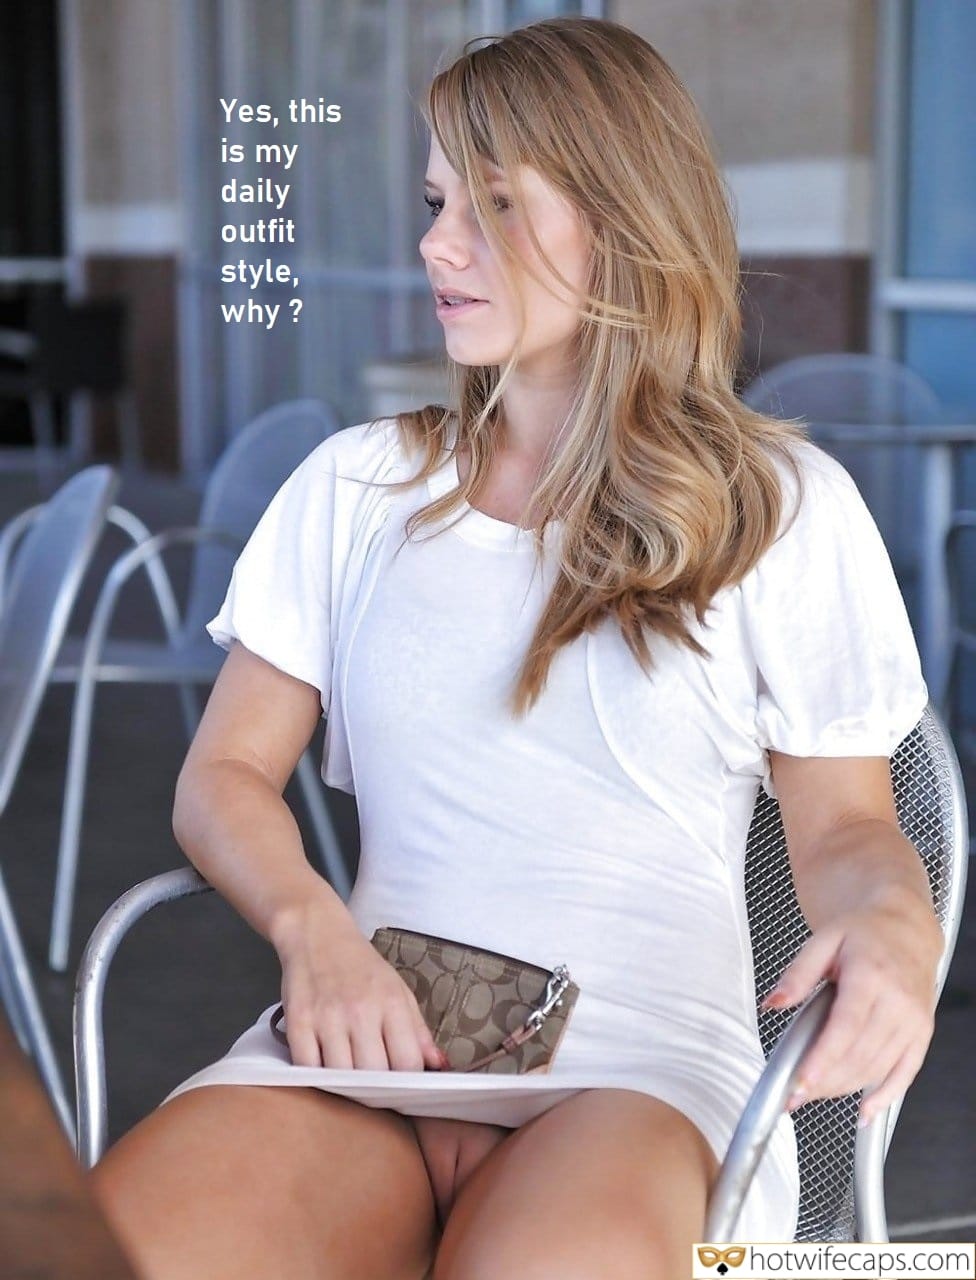 Flashing, Humiliation, No Panties, Public Hotwife Caption №568912 Innocent teen thinks there is nothing bad about going out without panties image